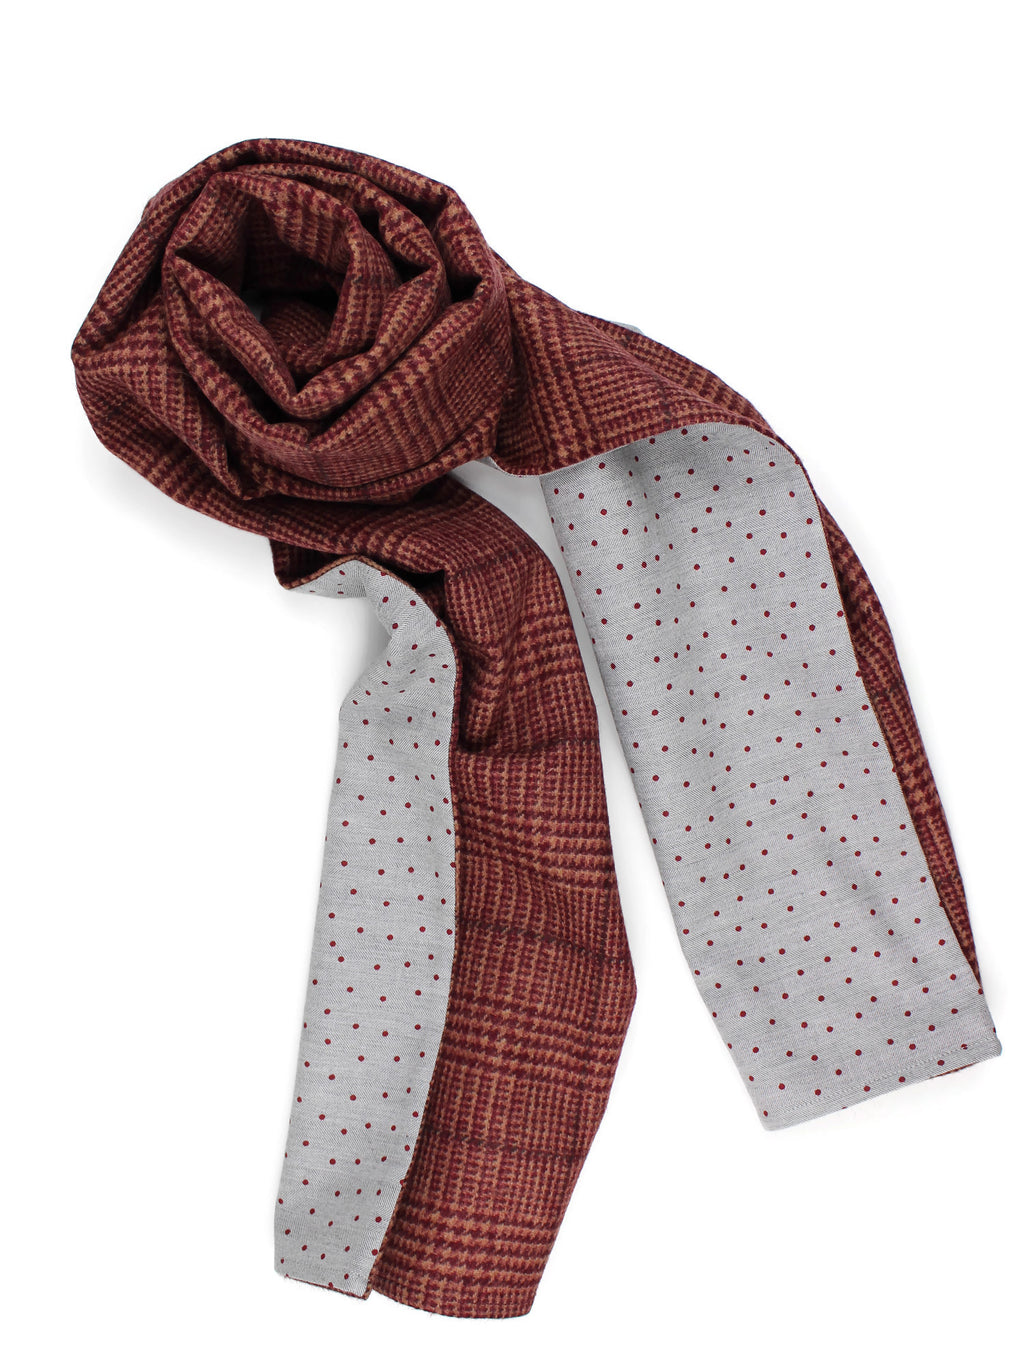 Beautiful Men´s Scarf combination of the classic Wool Check in bordeaux tones and a soft grey Cotton with printed small red dots